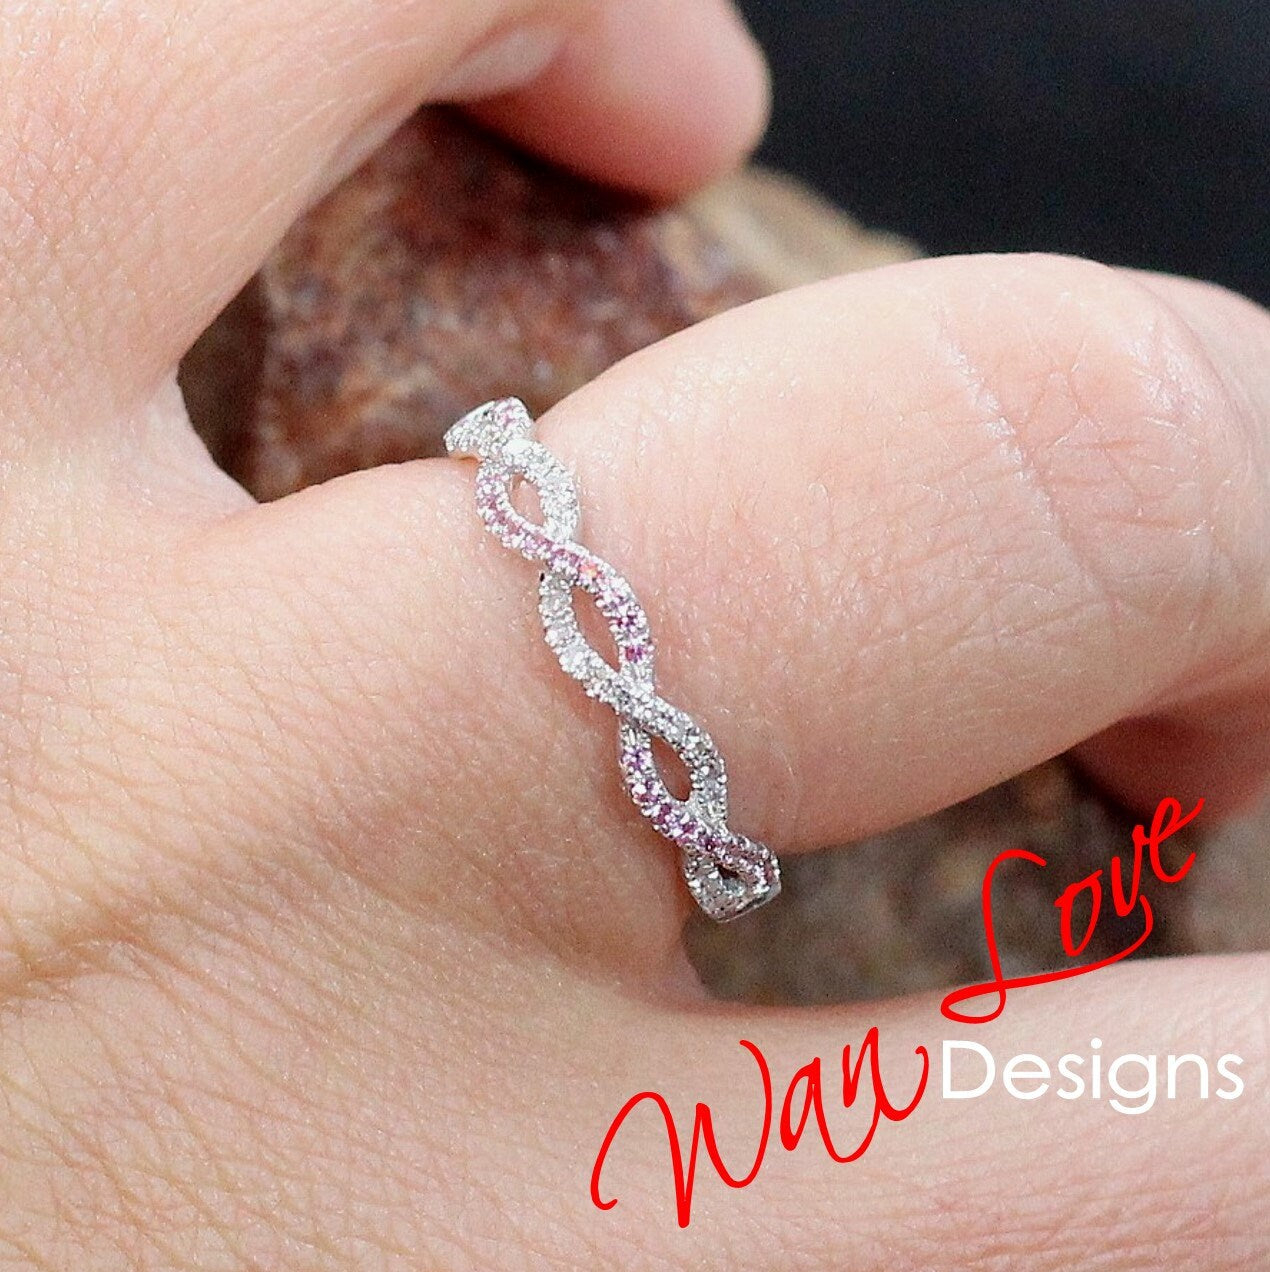 Infinity Twist Pink Sapphire Diamond Band, Round Twisted Curved Pink Moissanite Ring, Braided Wedding Band, Bridal Gold Birthstone Jewelry Wan Love Designs